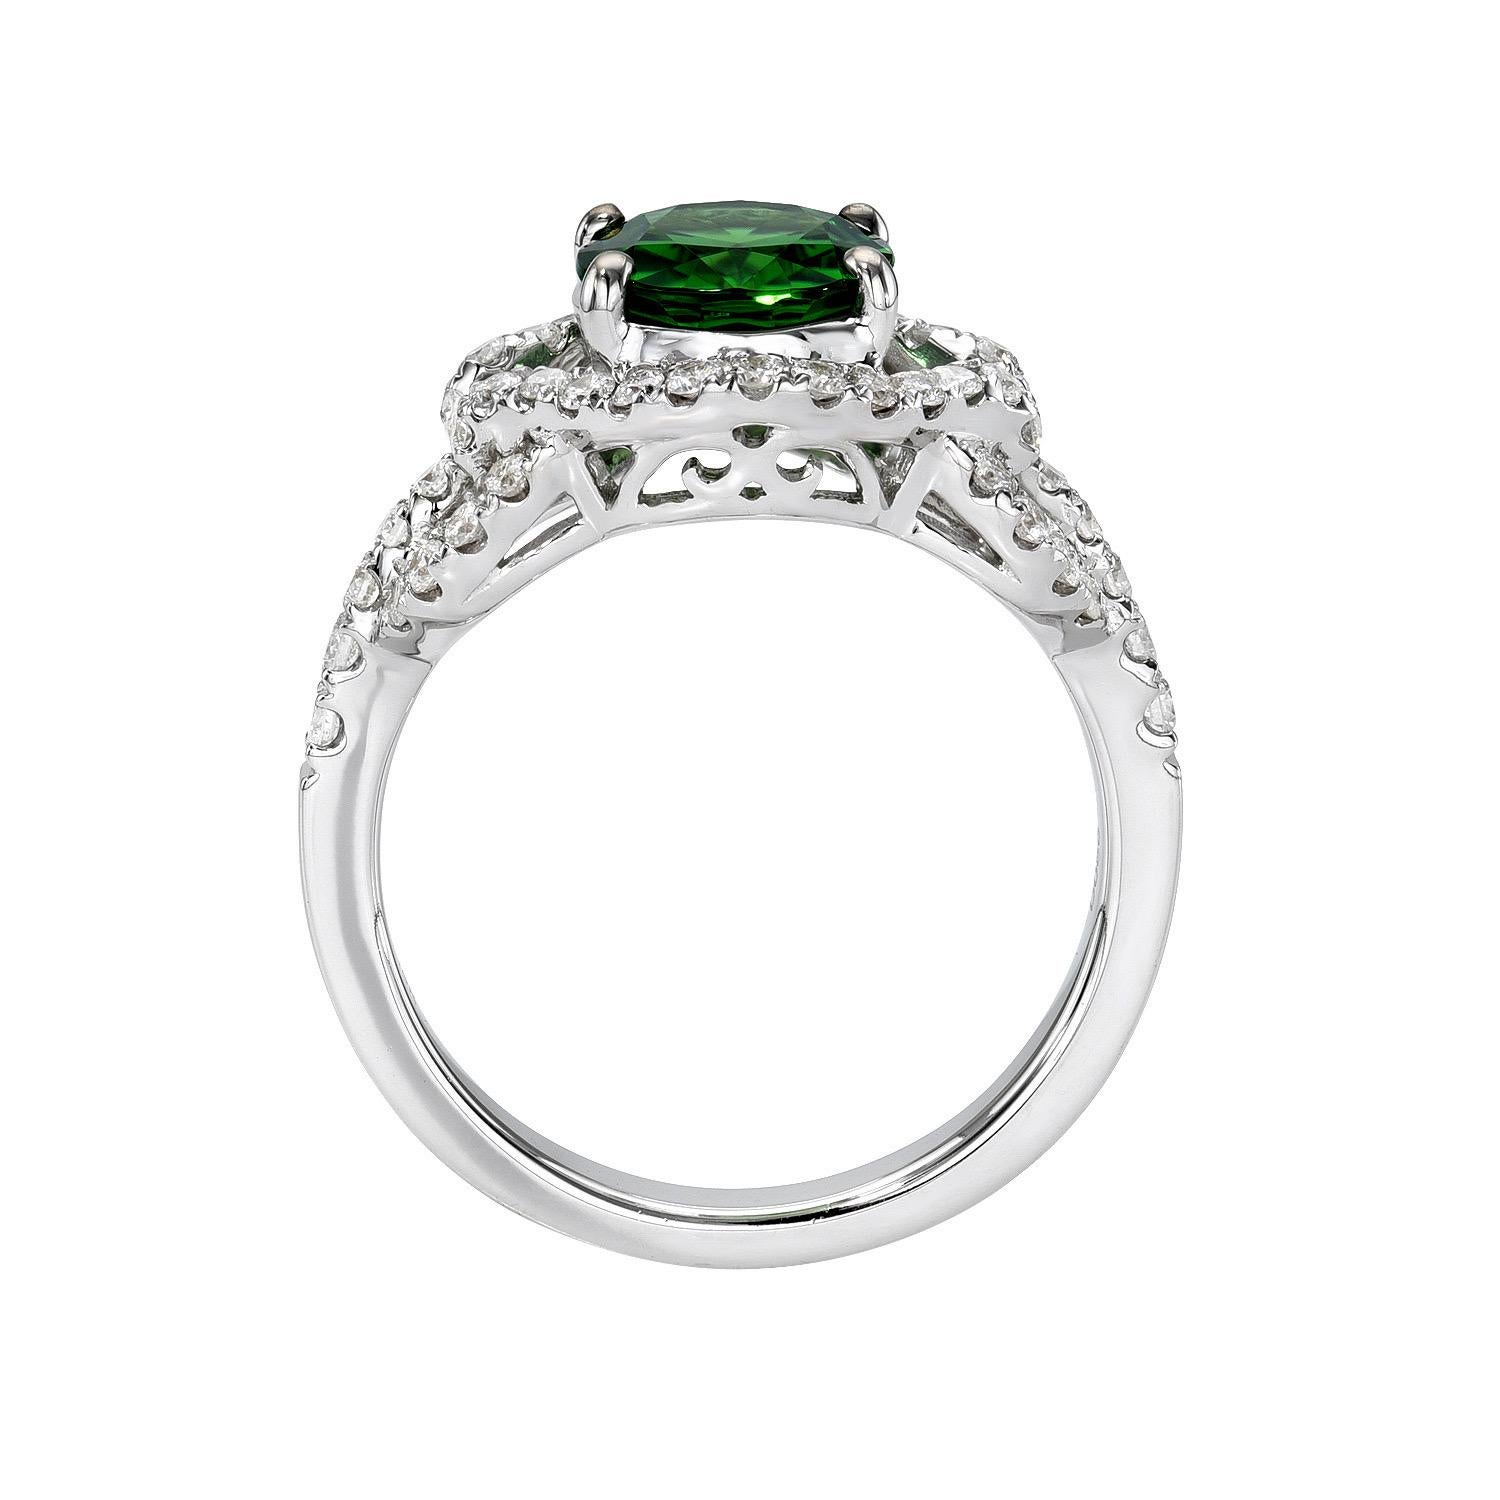 Very fine 1.86 carat green Chrome Tourmaline 18K white gold ring, decorated with round brilliant diamonds totaling 0.56 carats.
Ring size 6.25. Resizing is complementary upon request.
Returns are accepted and paid by us within 7 days of delivery.